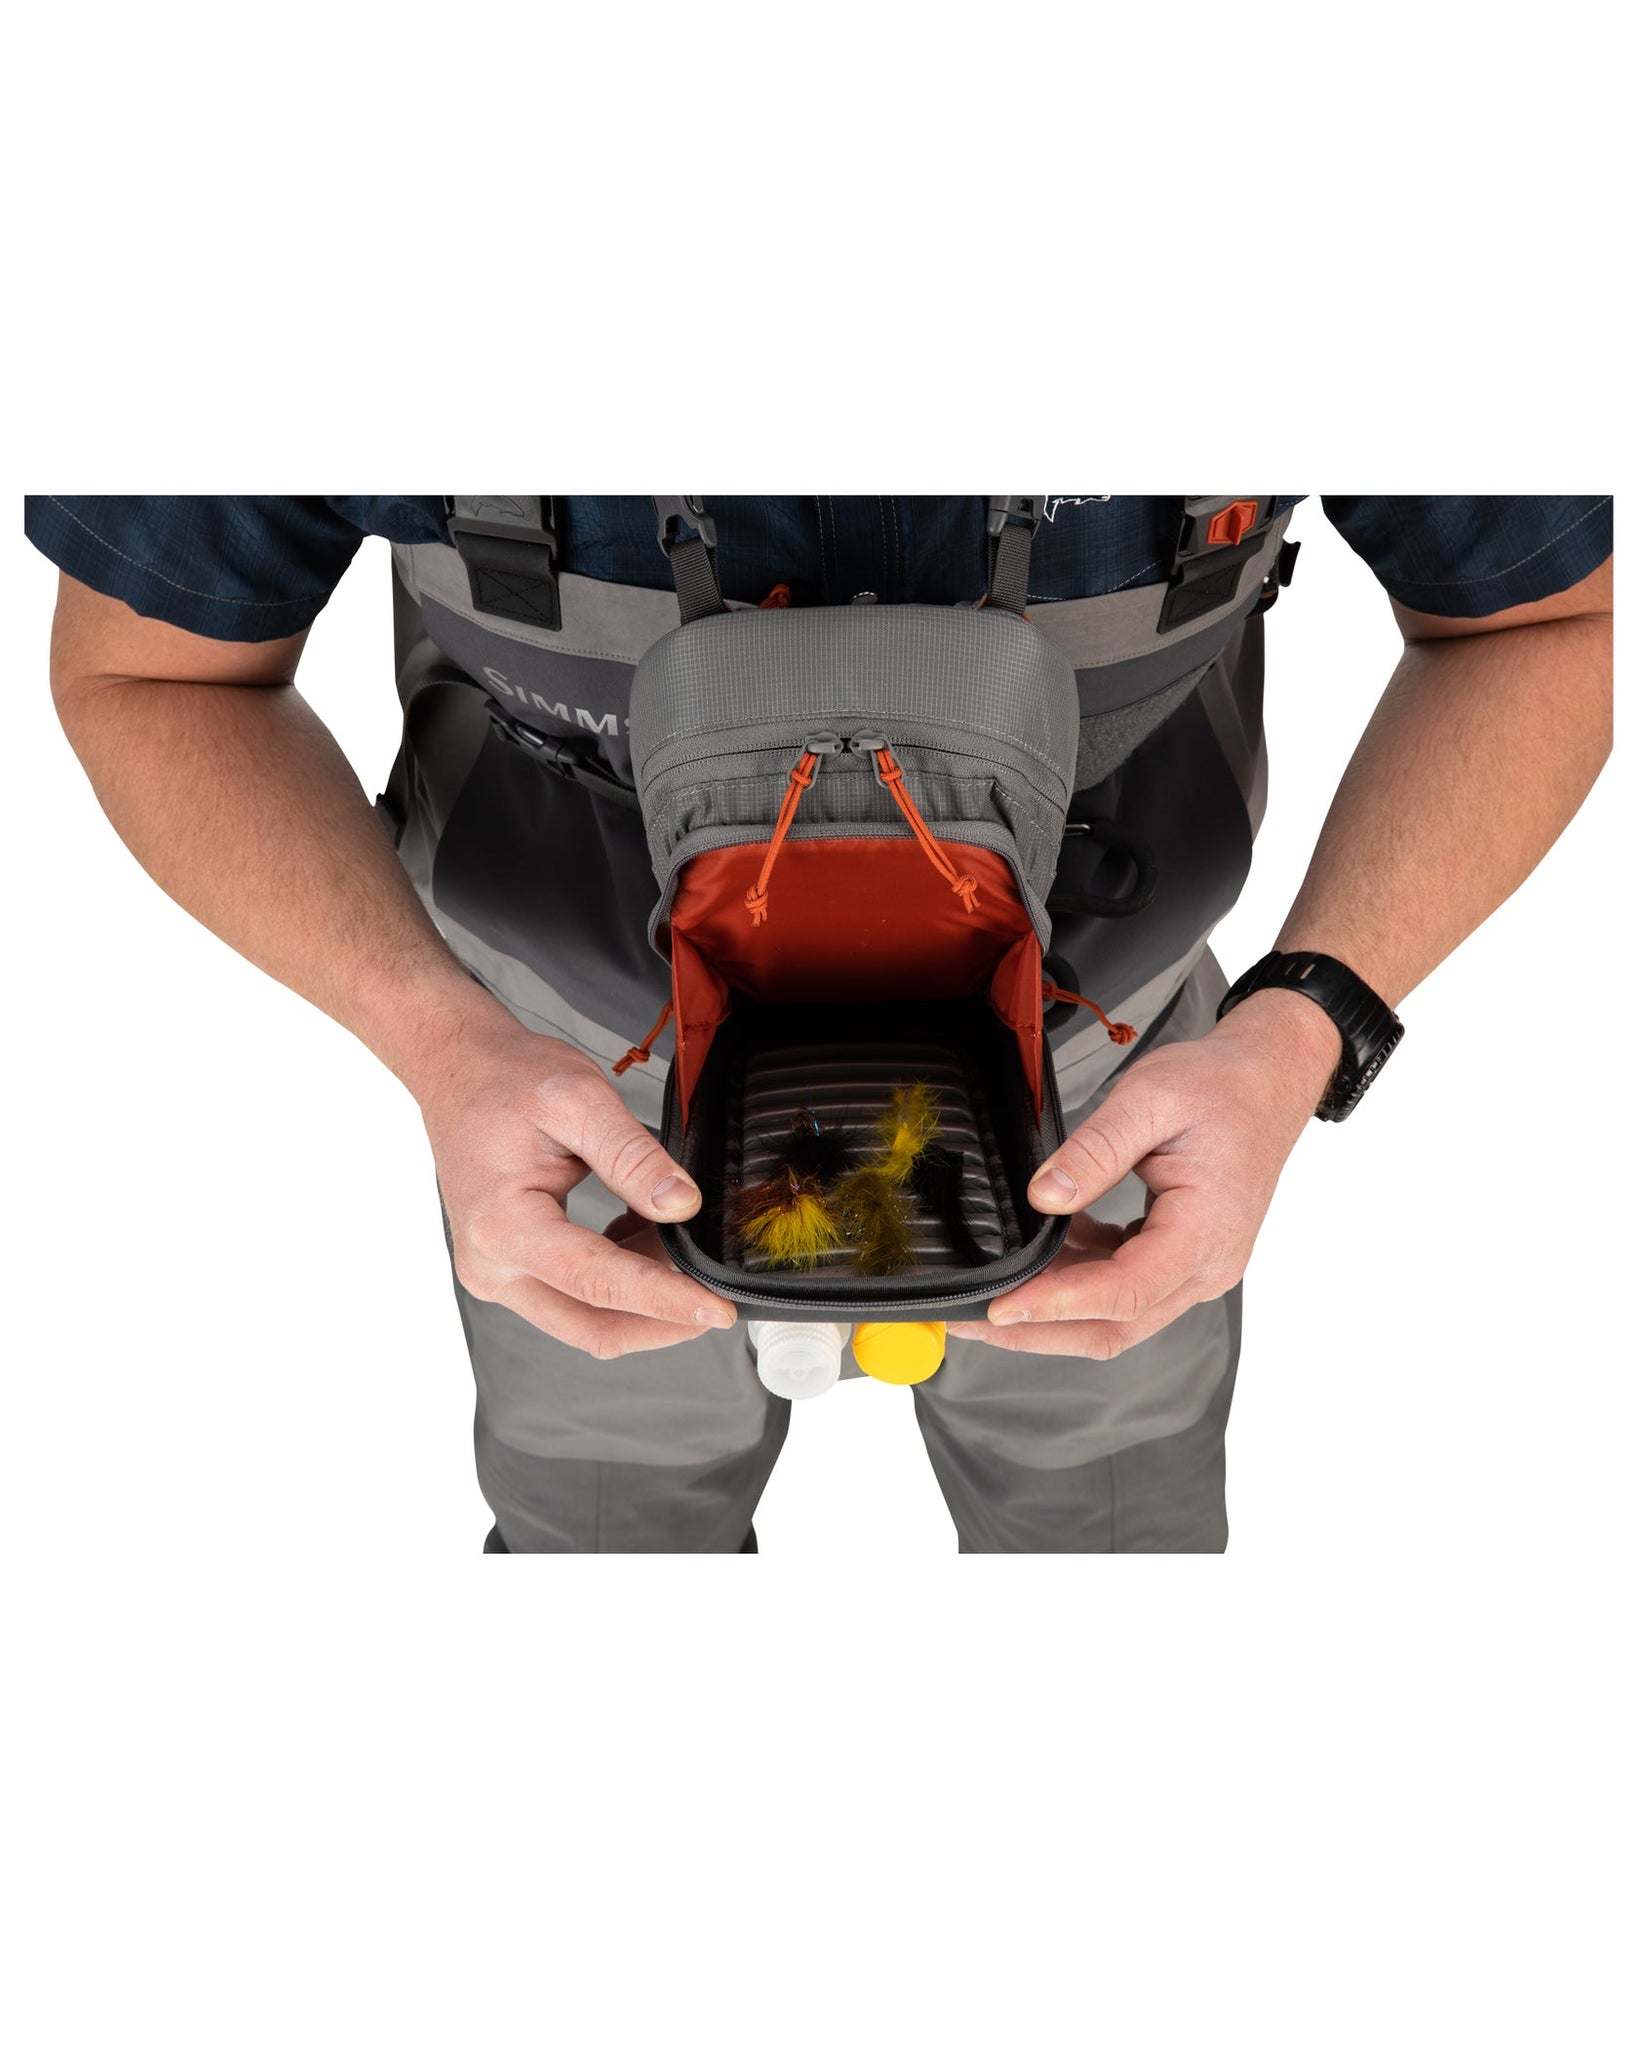 Simms Freestone Sling Pack, Simms Sling Pack For Sale Online